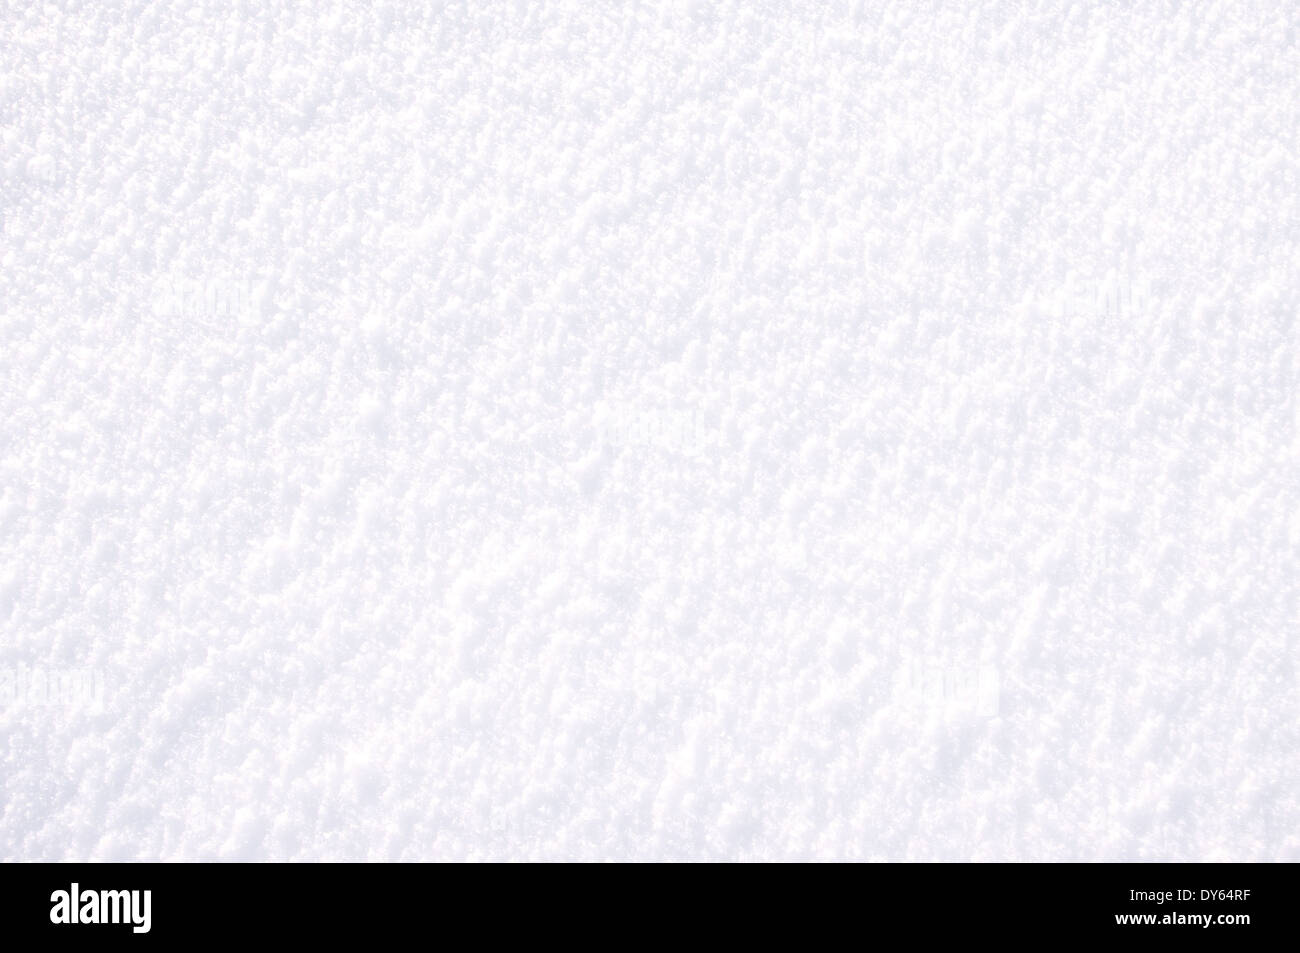 White snow surface for background. Stock Photo